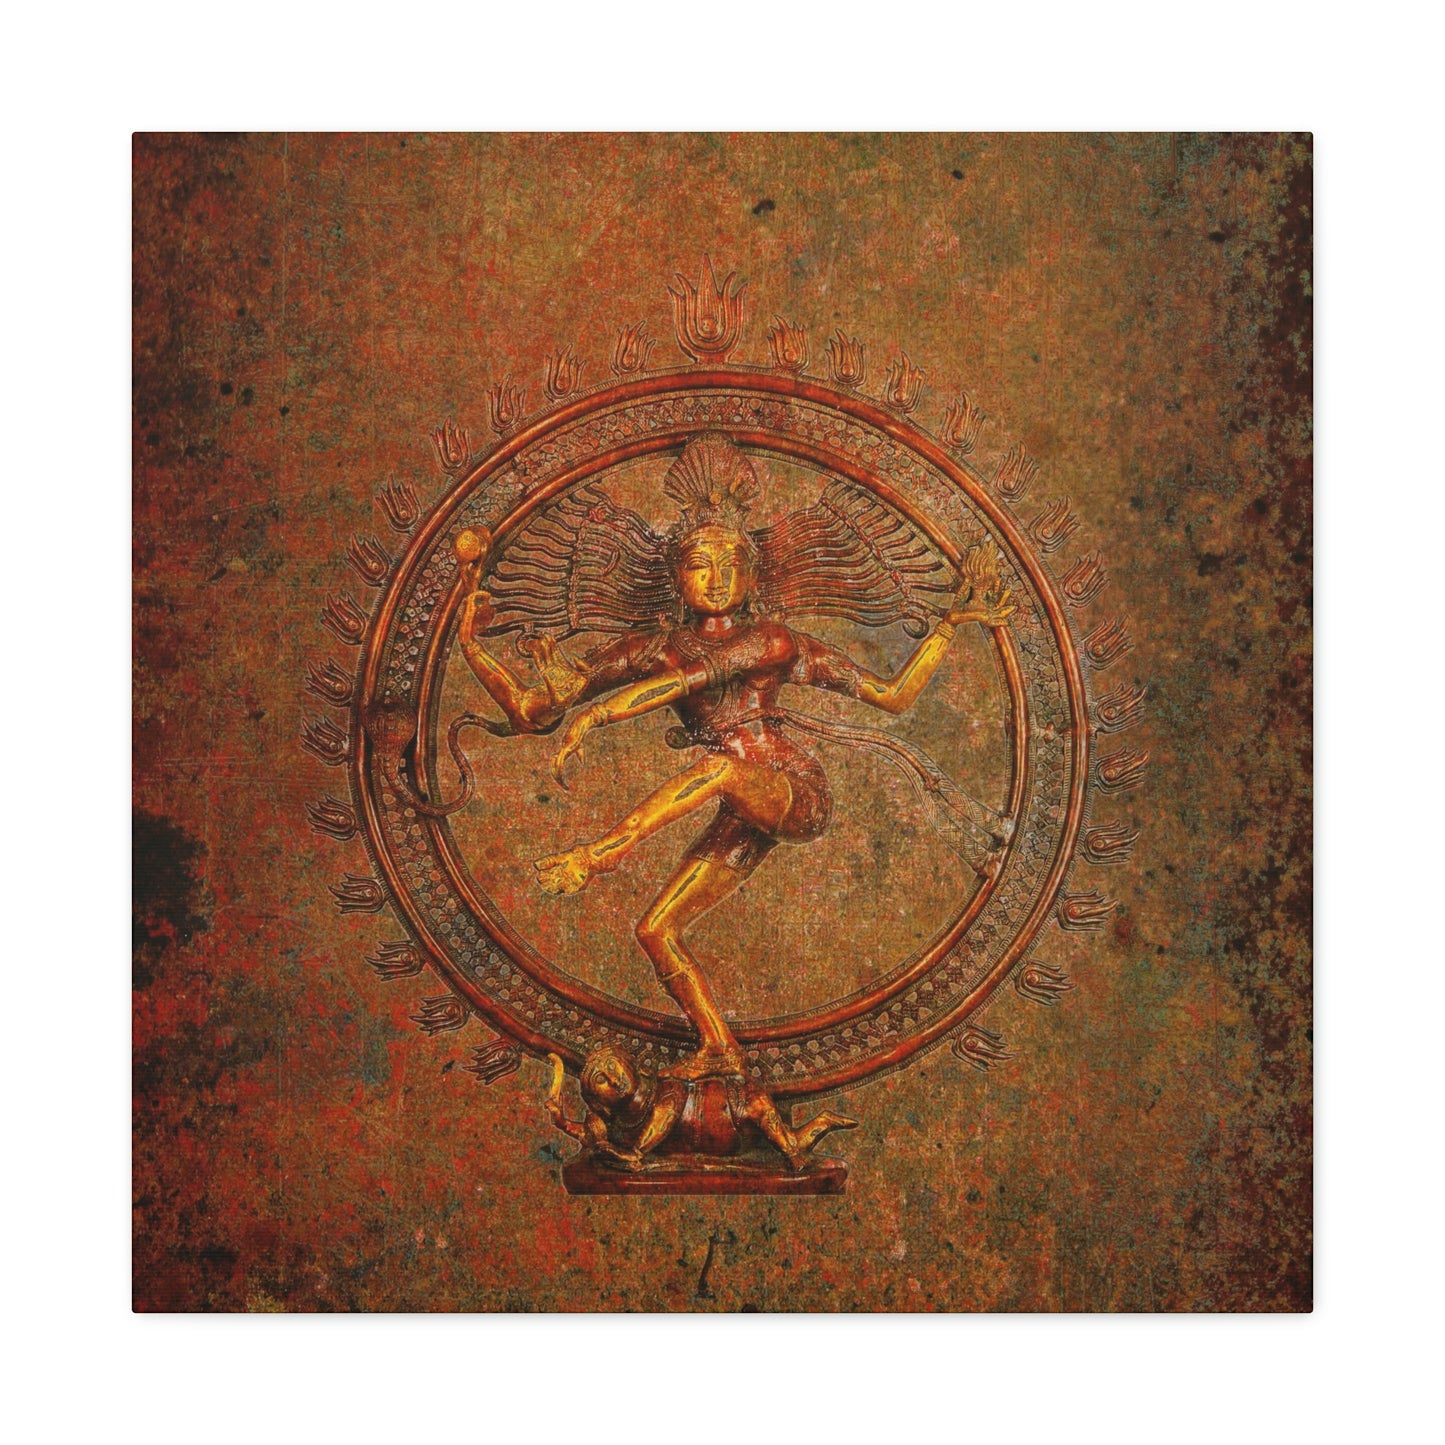 Deities Themed Art Work - Shiva on a Distressed Background Print on Unframed Stretched Canvas